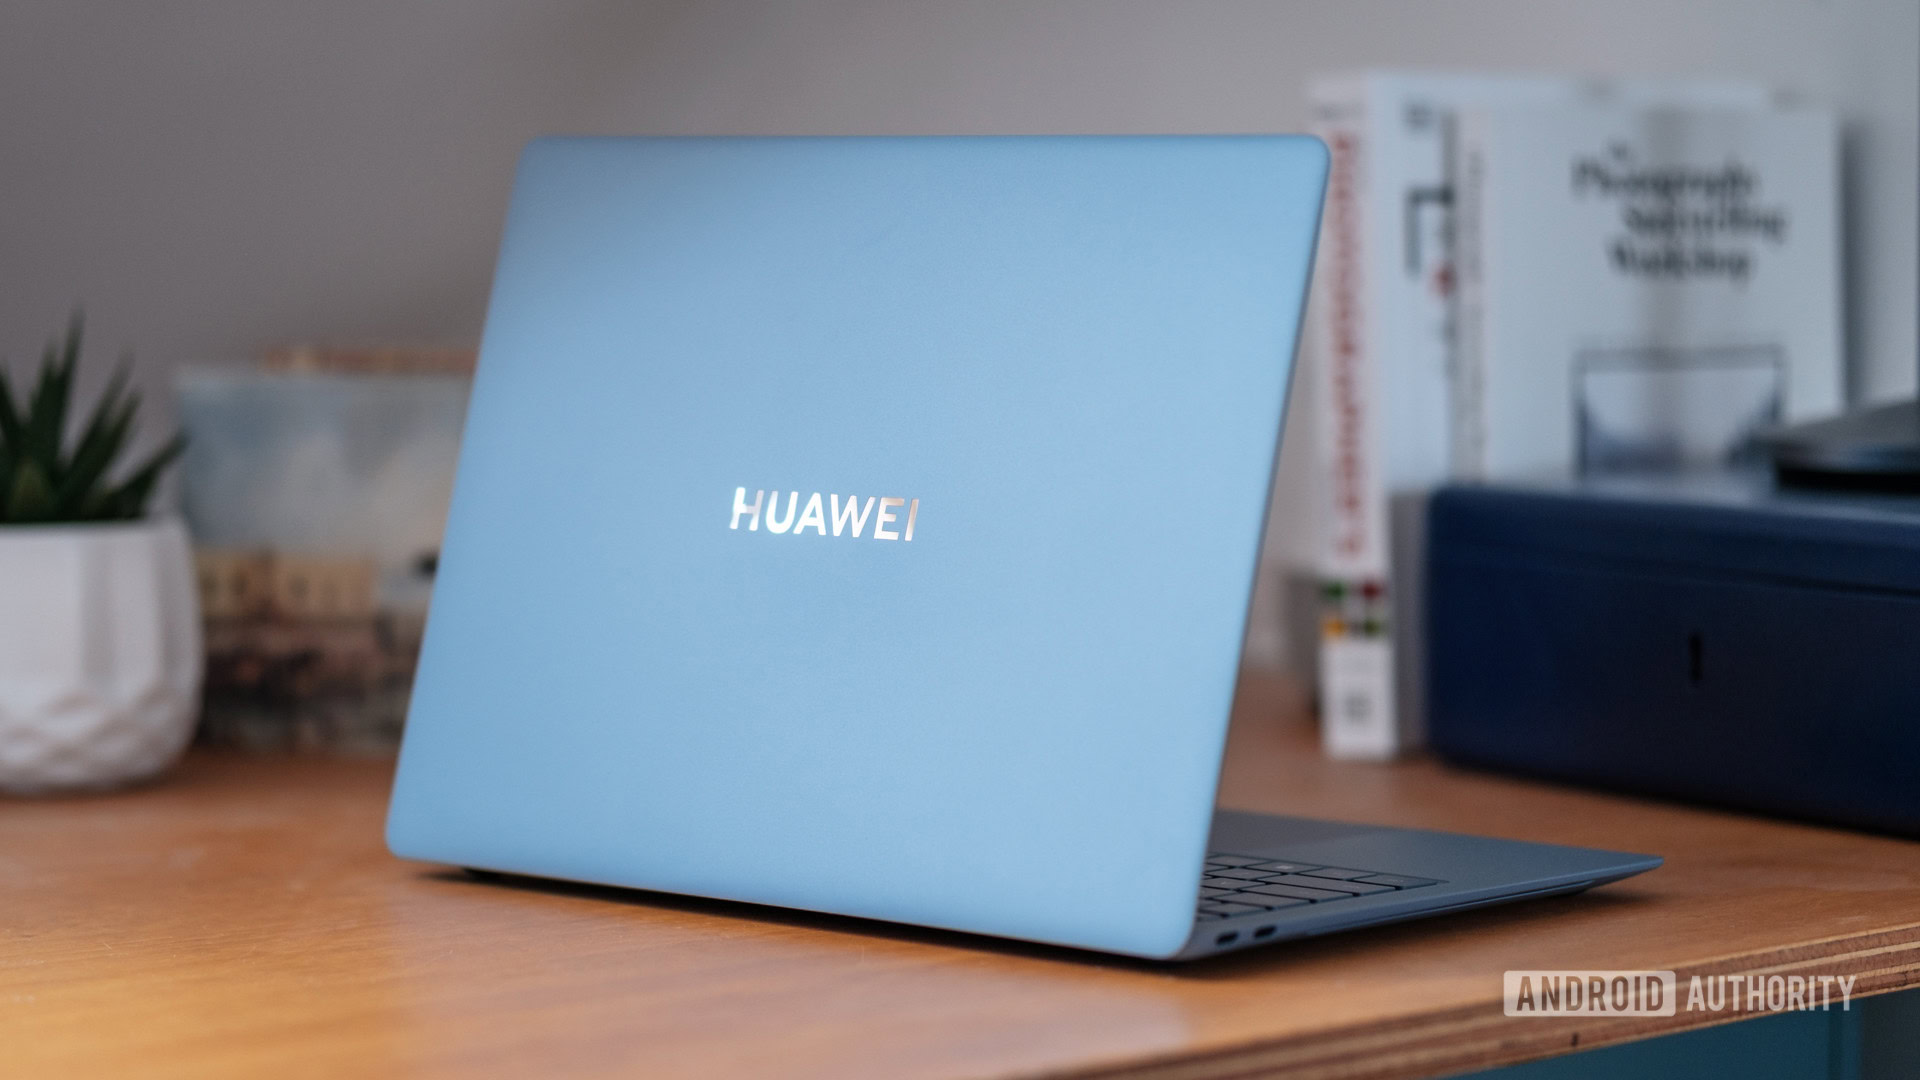 After phones, the US now wants to hurt Huawei's laptop business